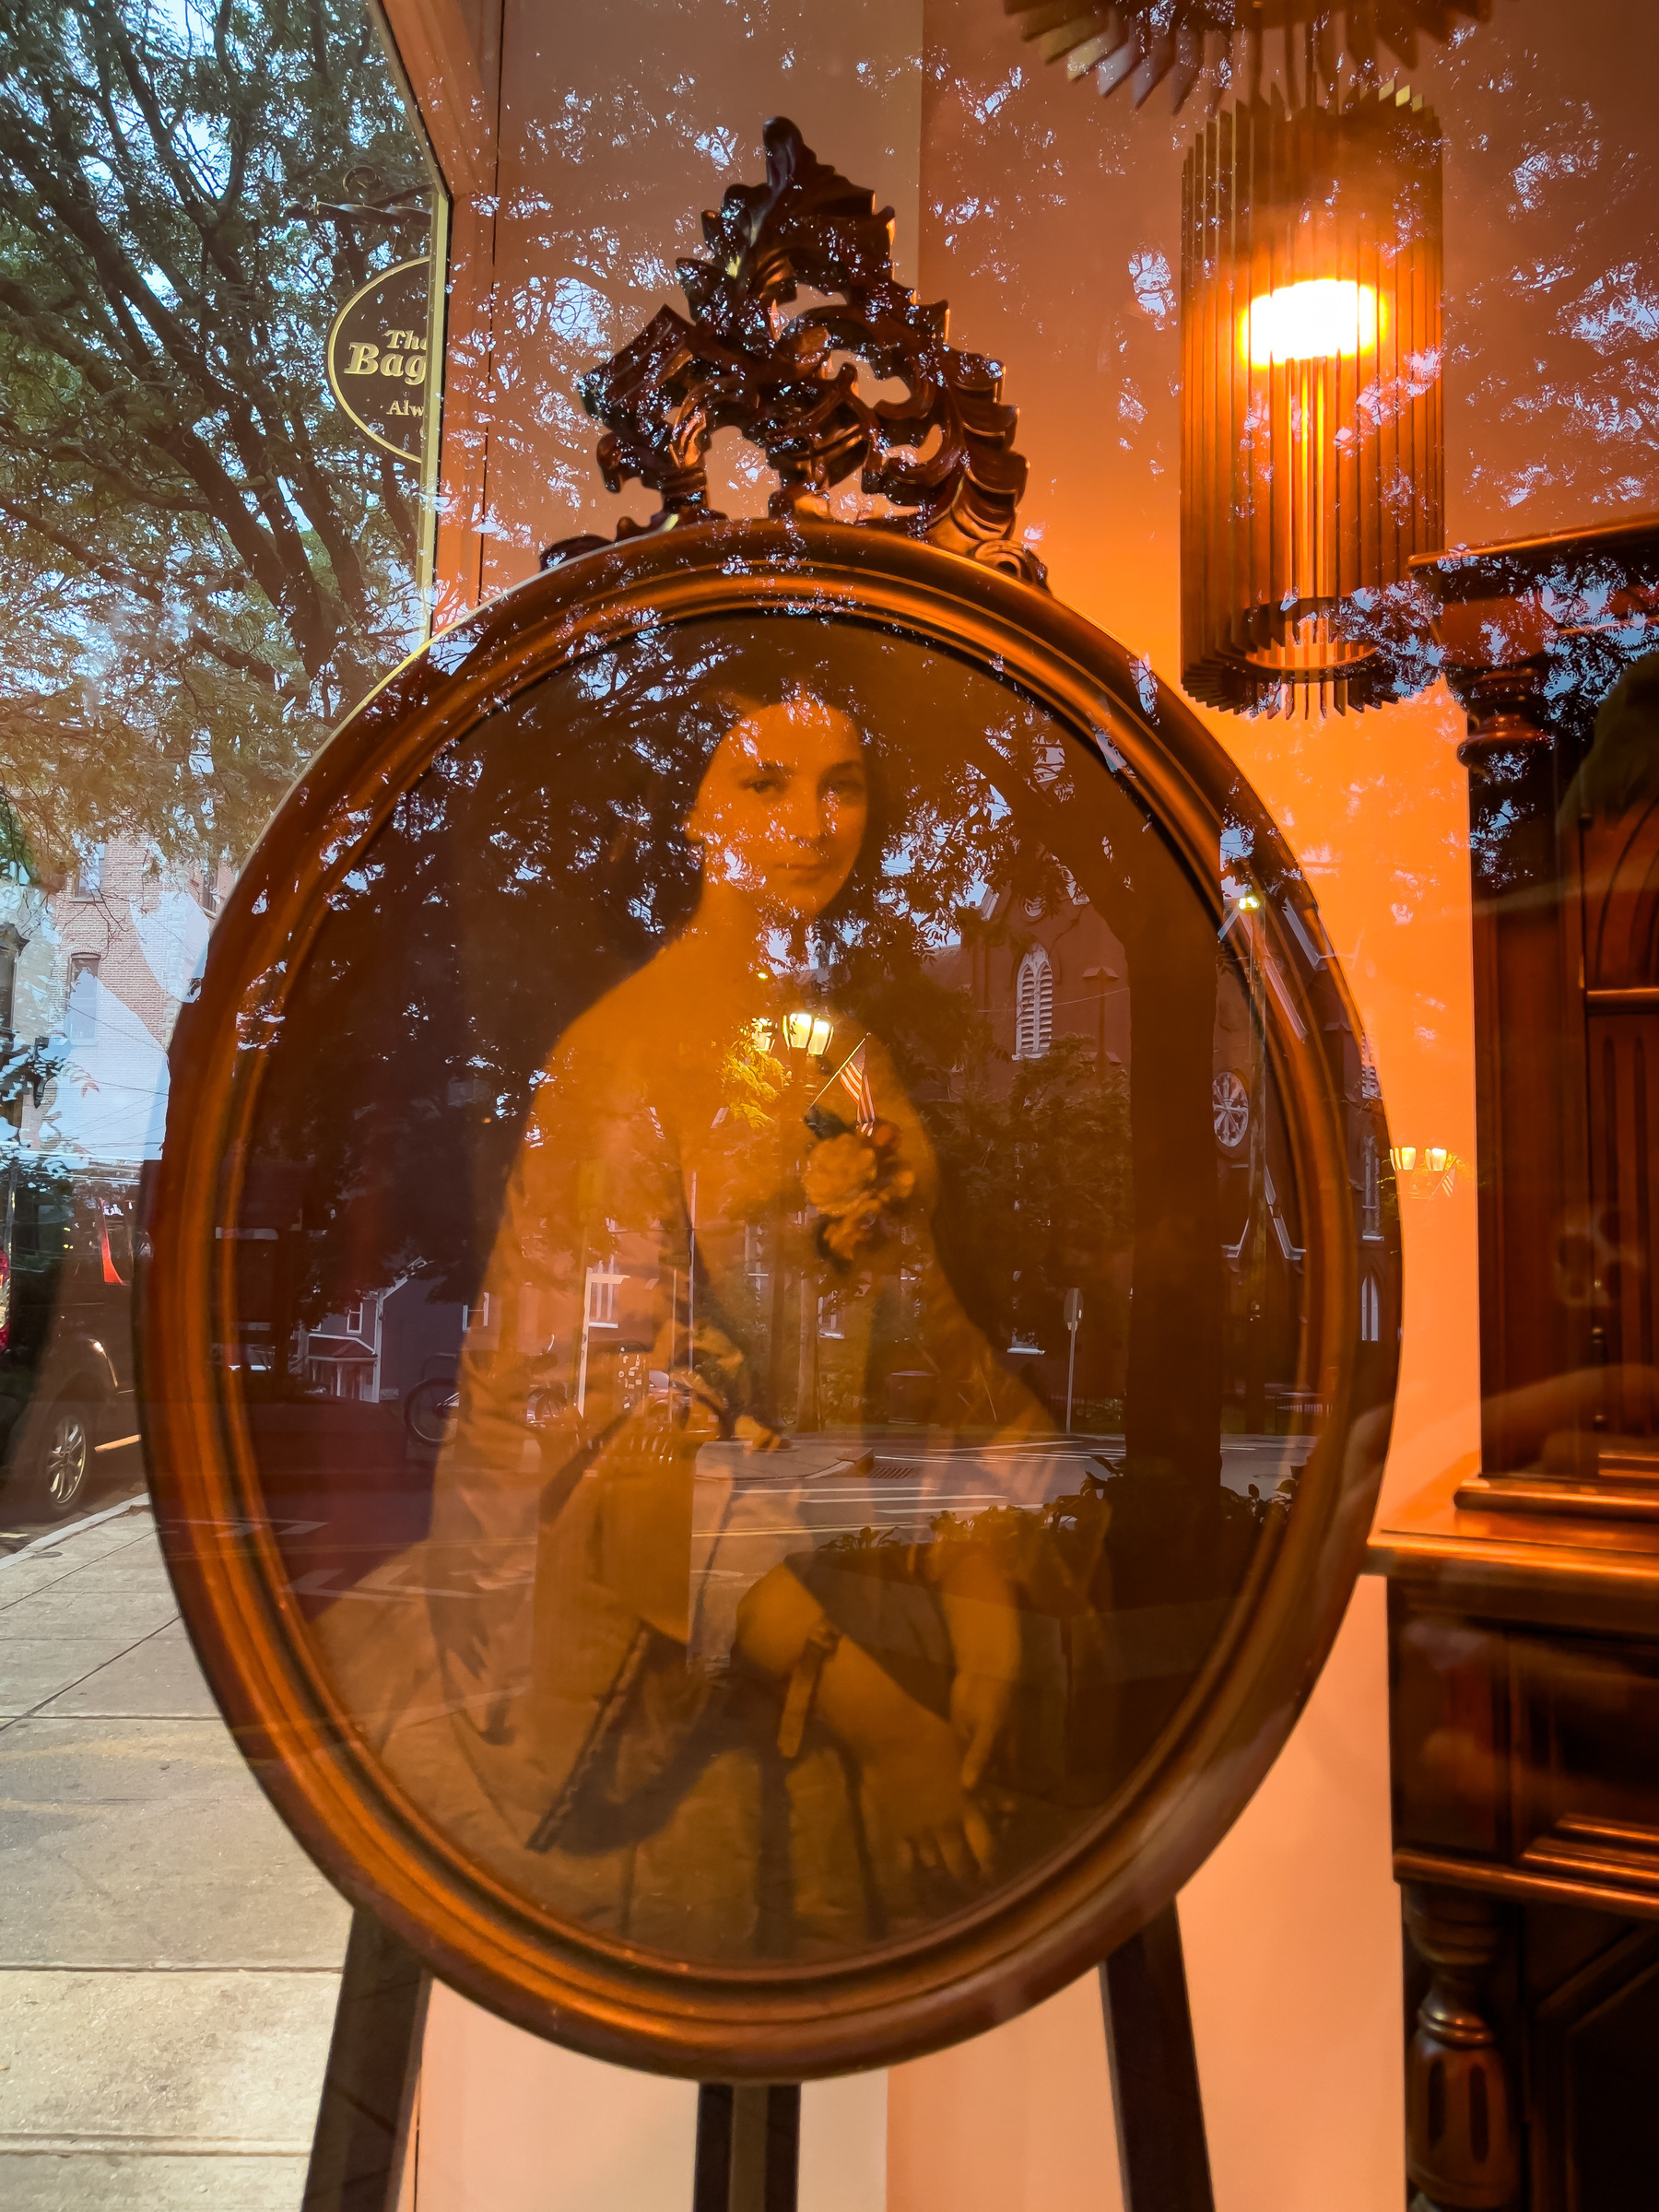 Painting of woman in Colonial/Victorian dress. Oval frame and canvas. In an antique shop window.